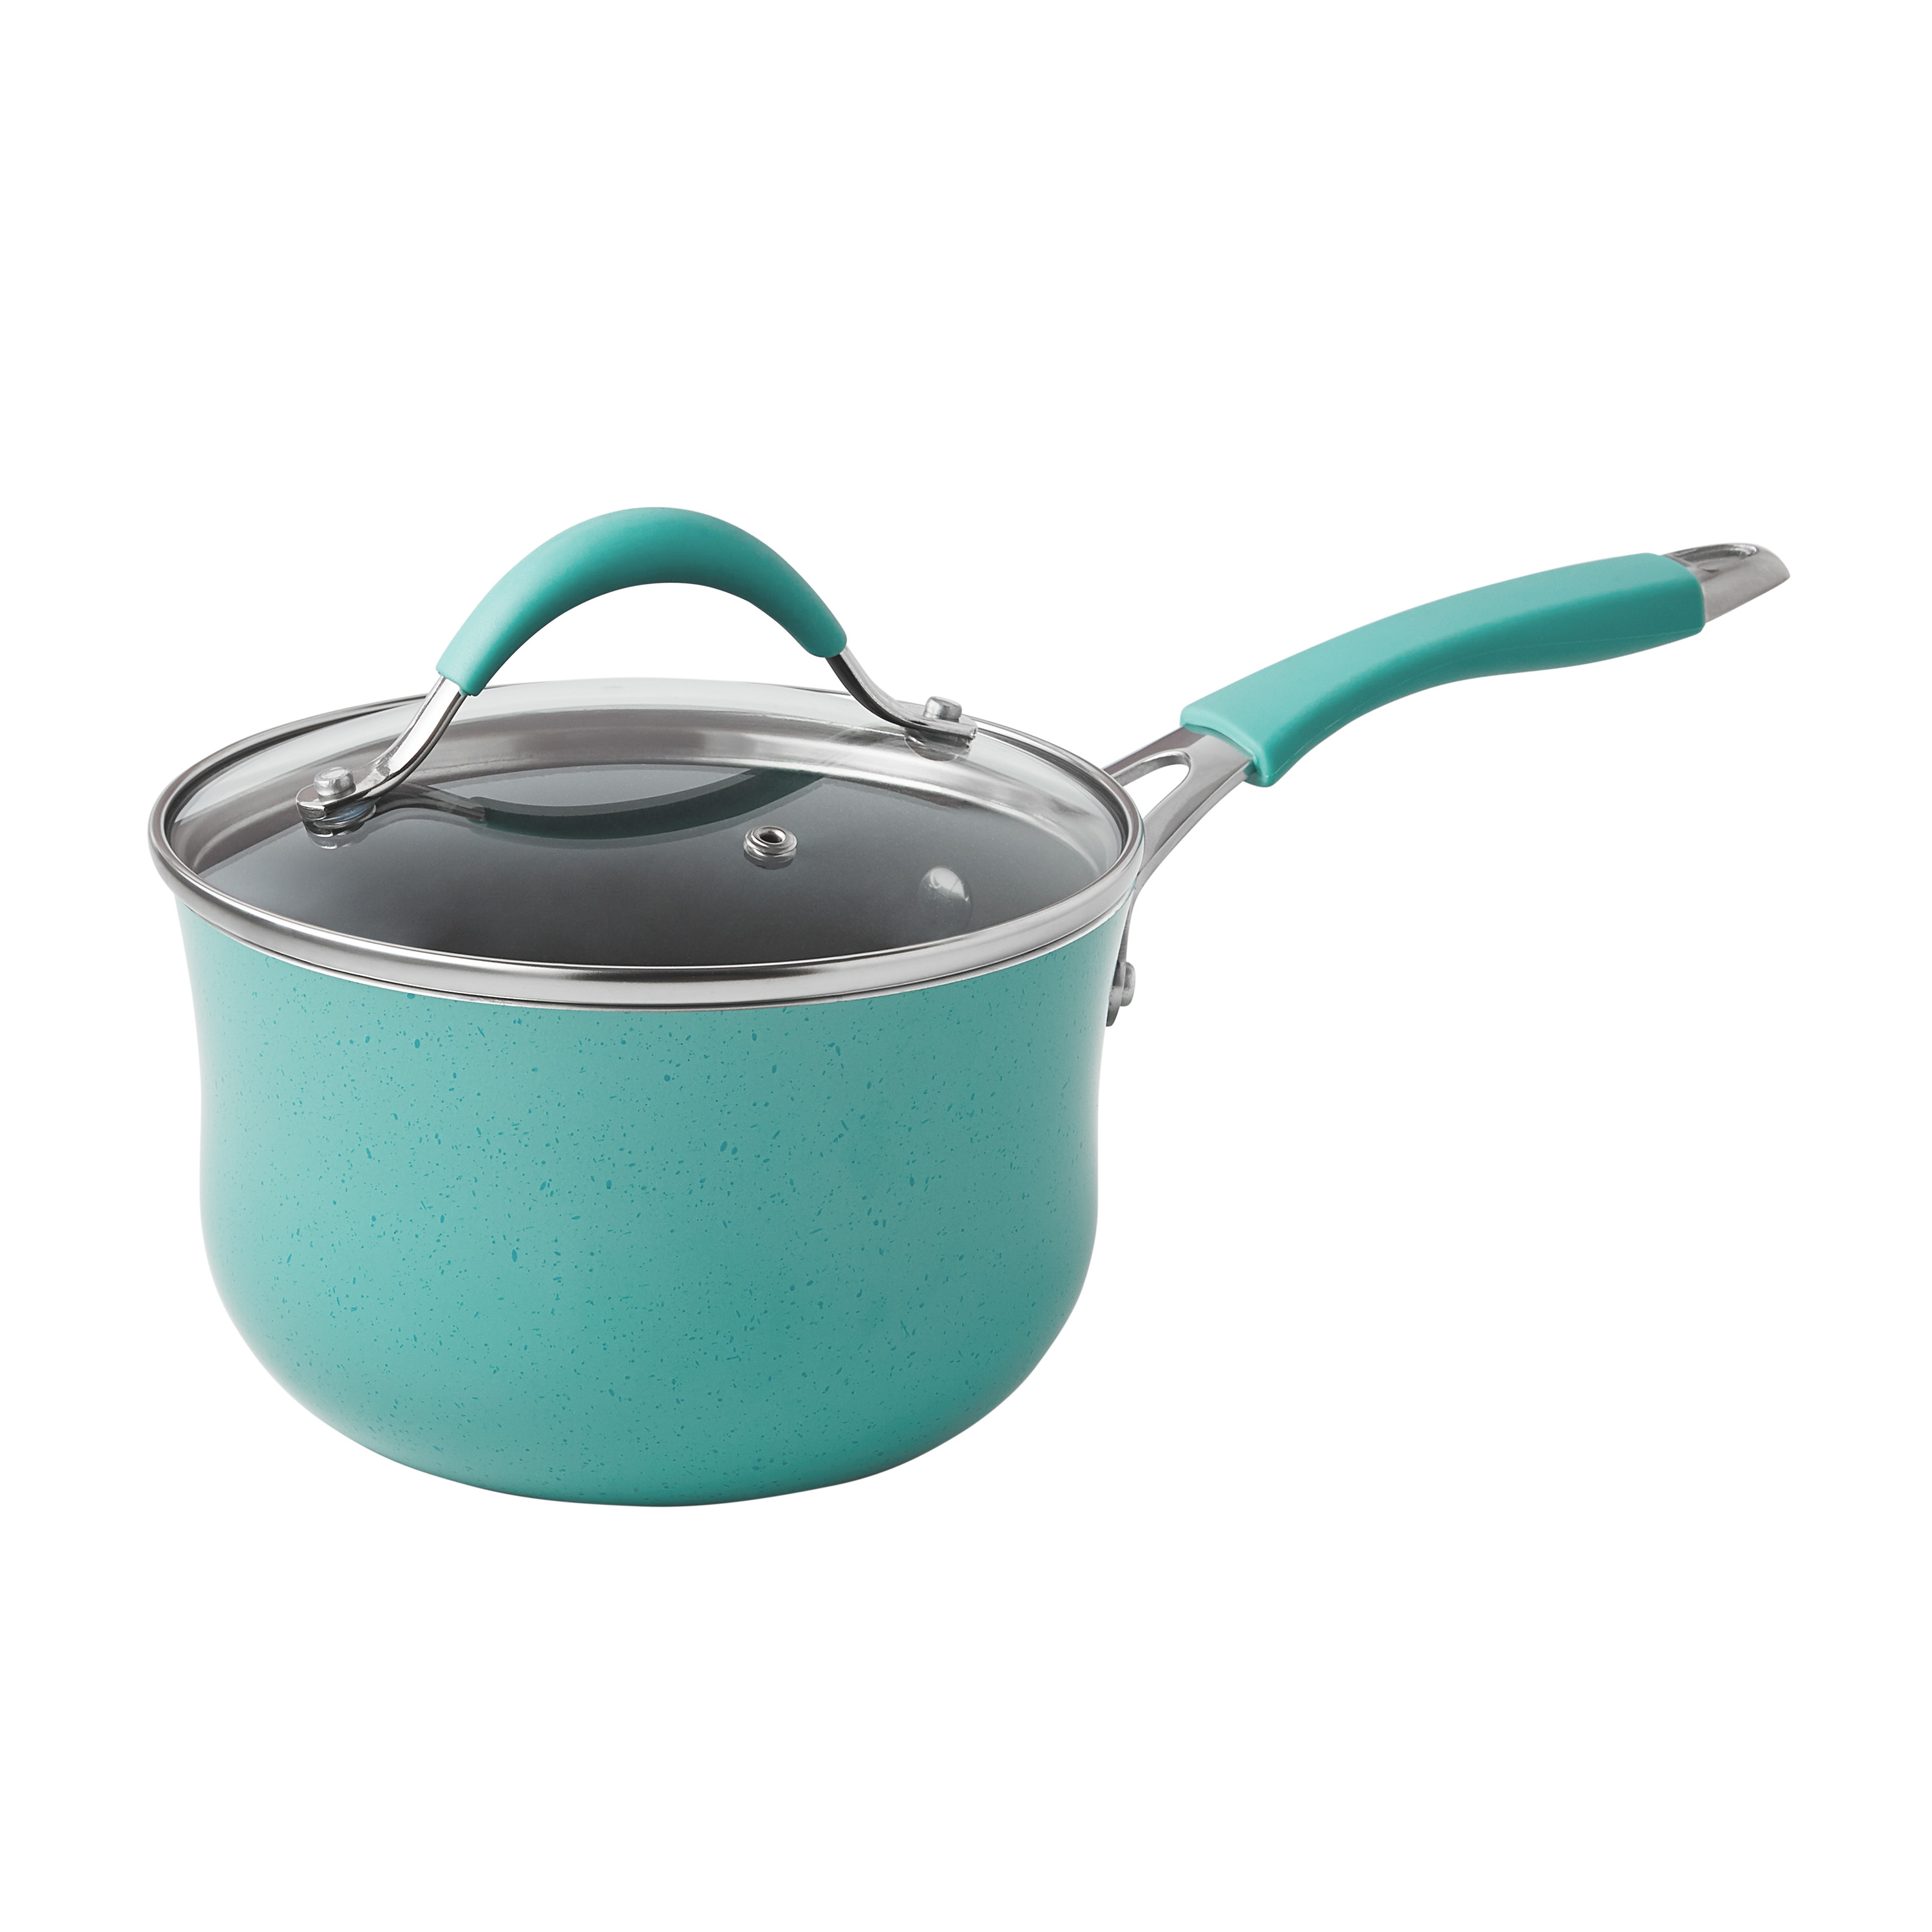 The Pioneer Woman Blooming Bouquet Aluminum Nonstick 19-Piece Cookware Set, Teal - image 7 of 11